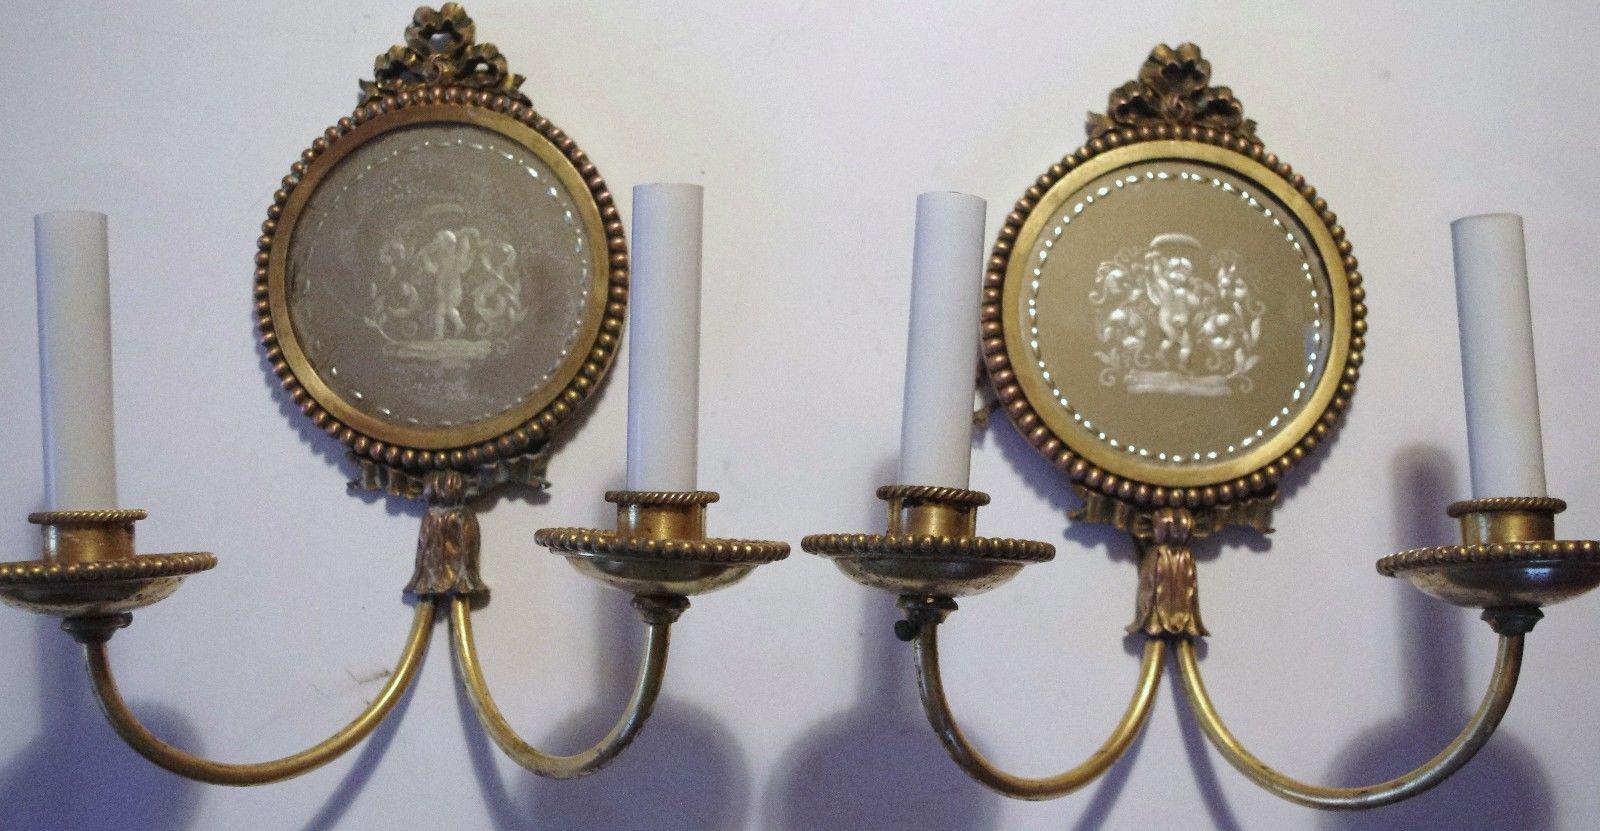 Pair 19thc Neoclassic Bronzw/Eglomise Cherubs Cavorting Wall Sconces by Caldwell In Good Condition For Sale In Opa Locka, FL